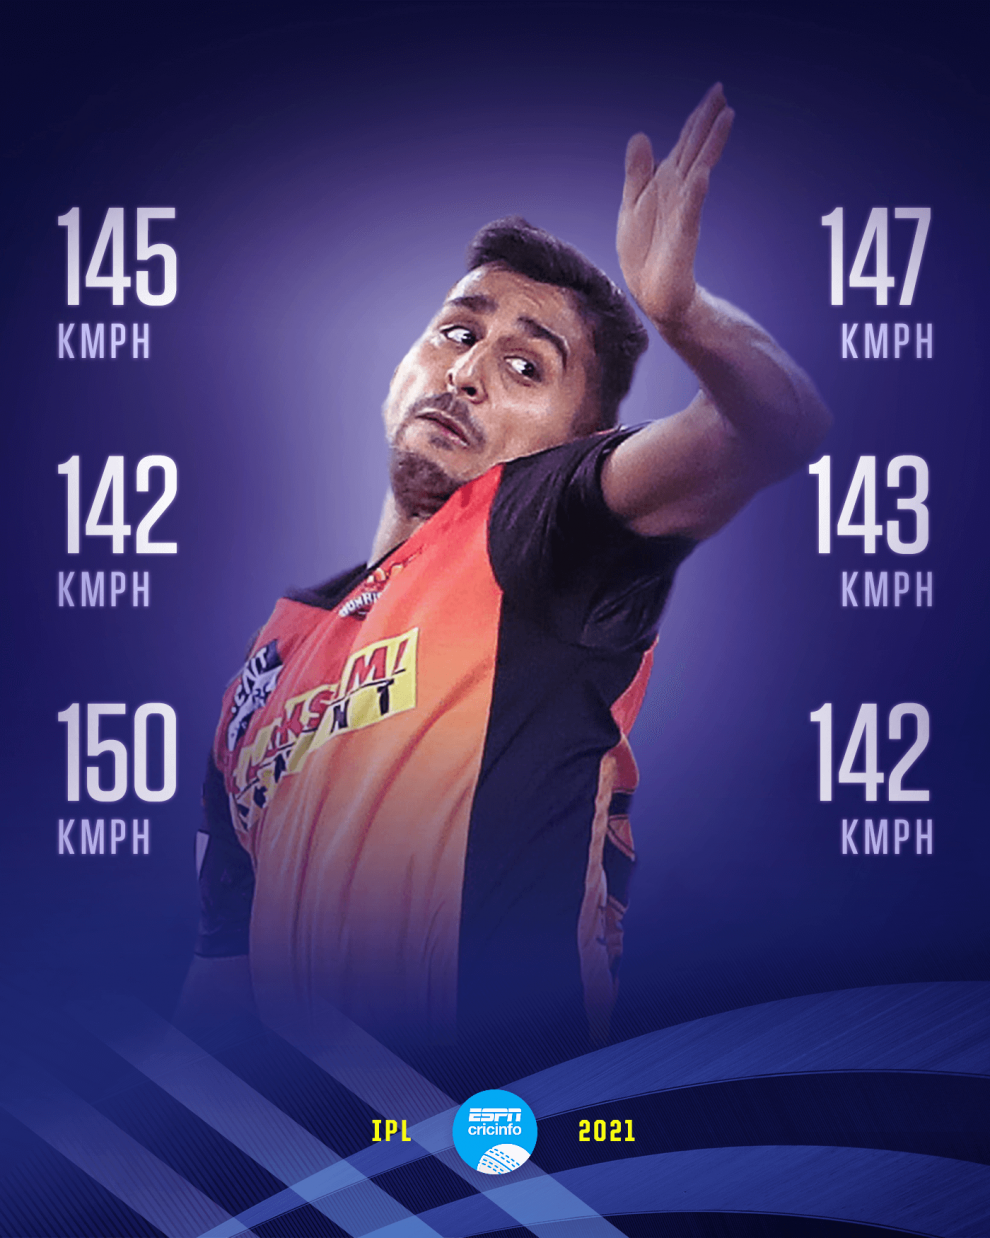 At 153 KPH: Malik continuous to impress, bowls fastest delivery of IPL 2021